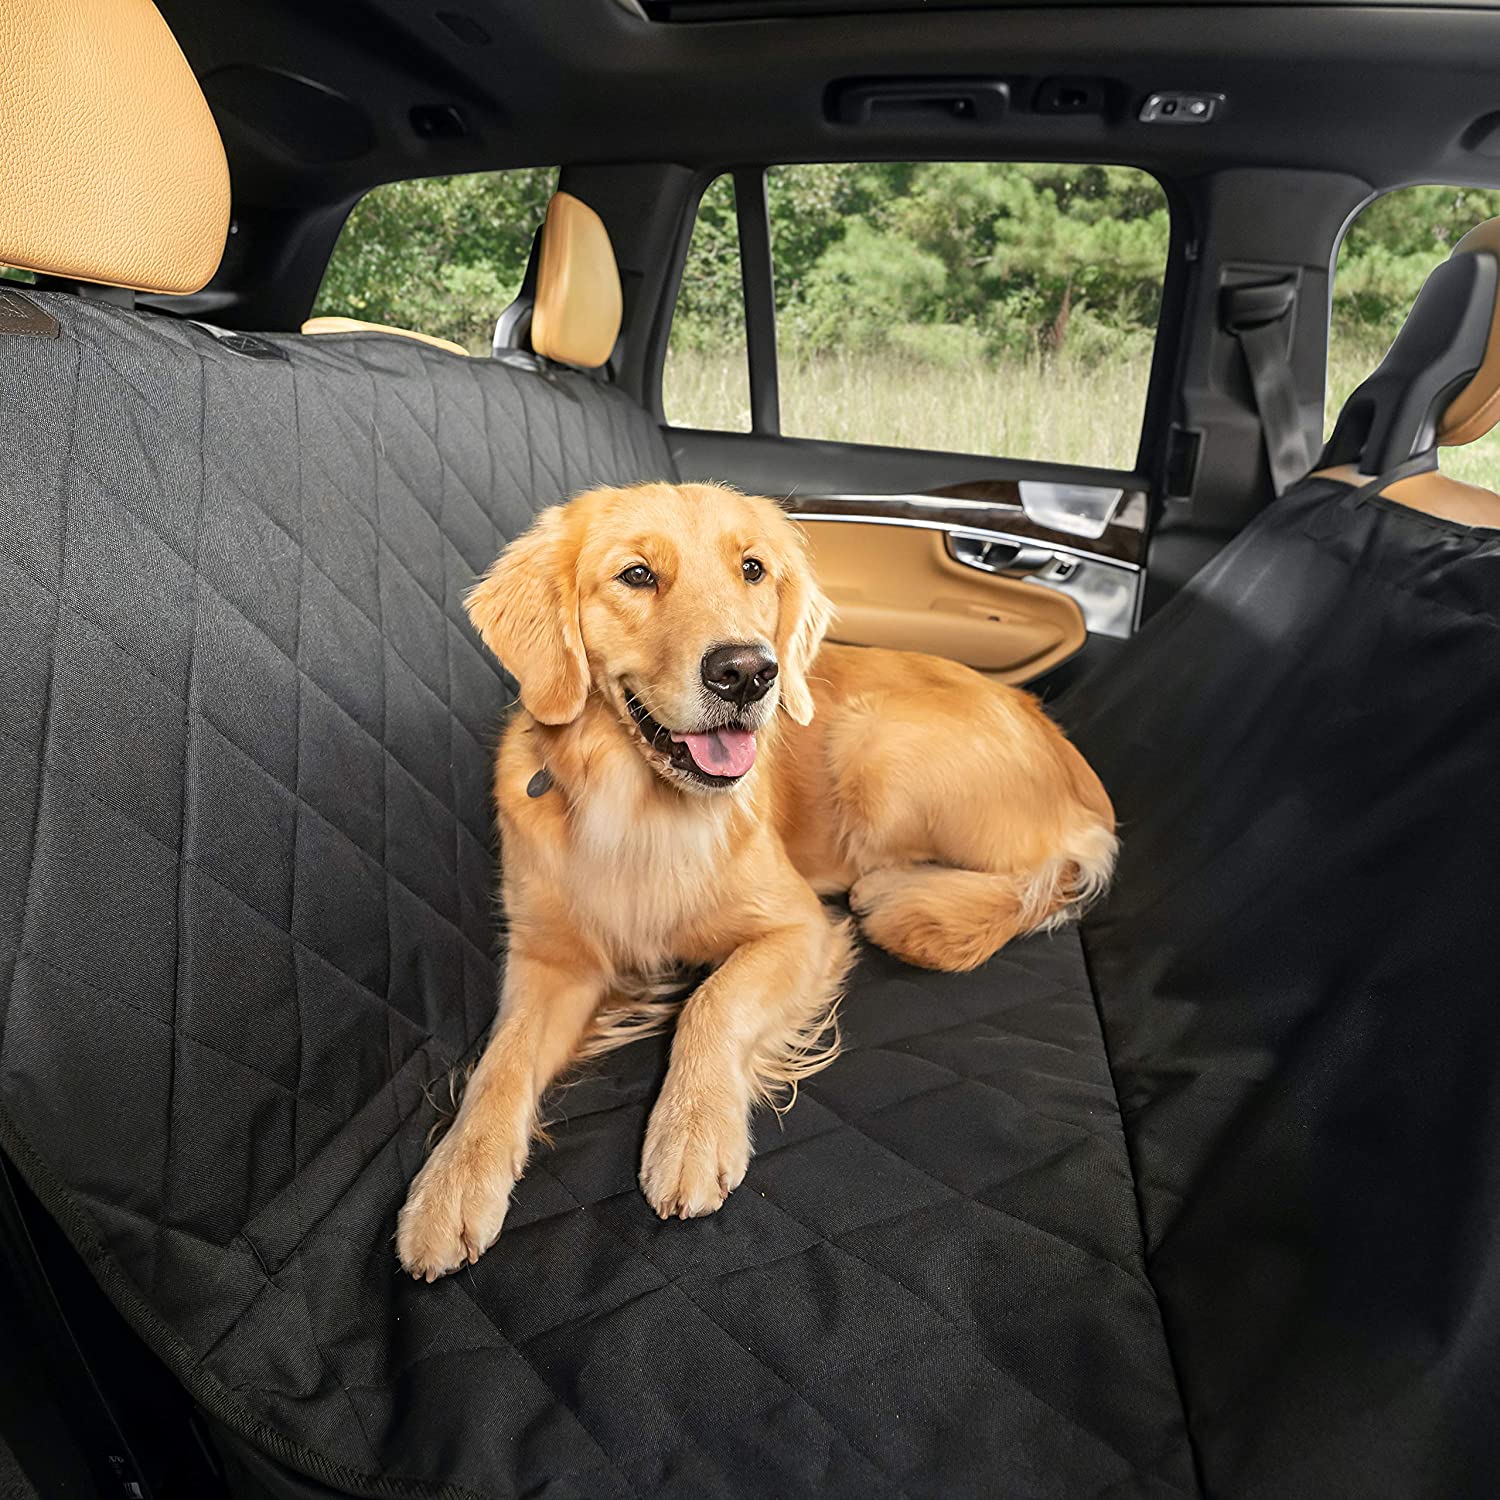 golden retriever lying in the back seat of the car